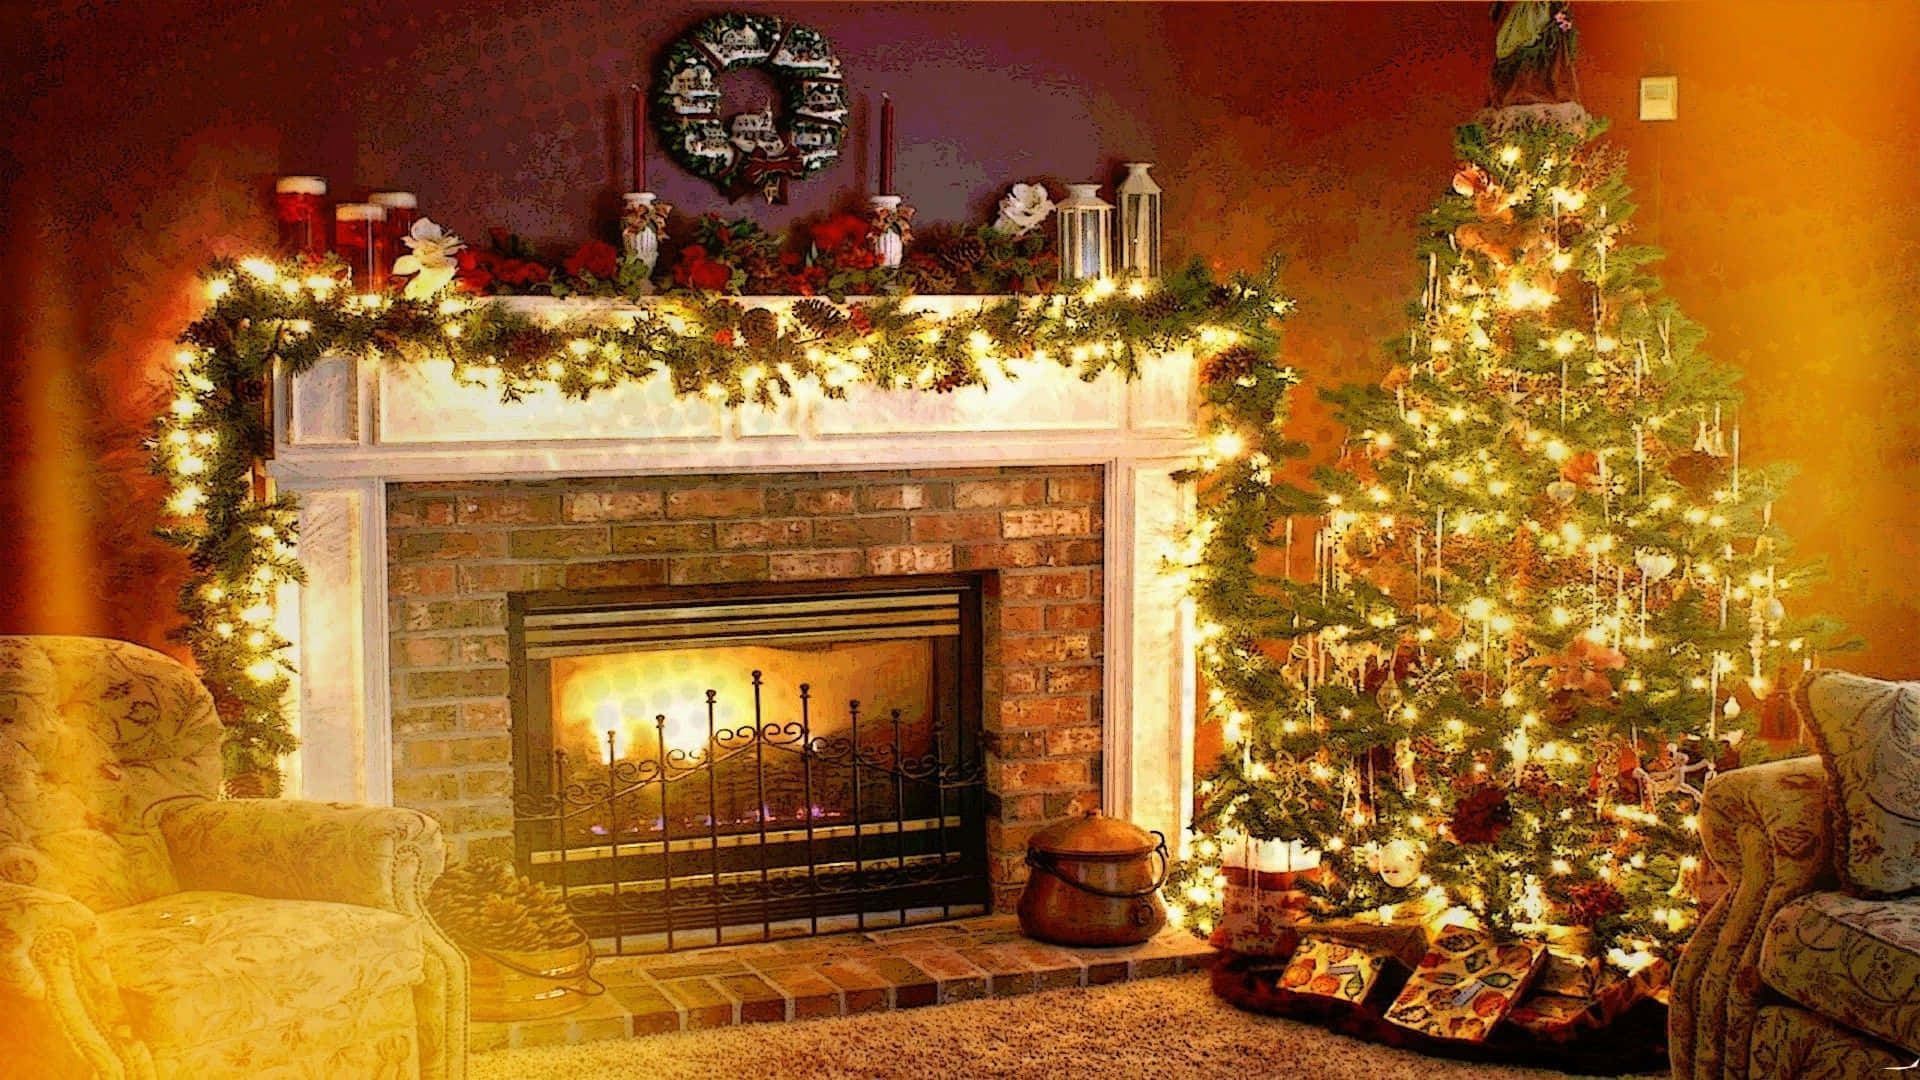 Enjoy the cozy atmosphere of a warm, crackling fire.